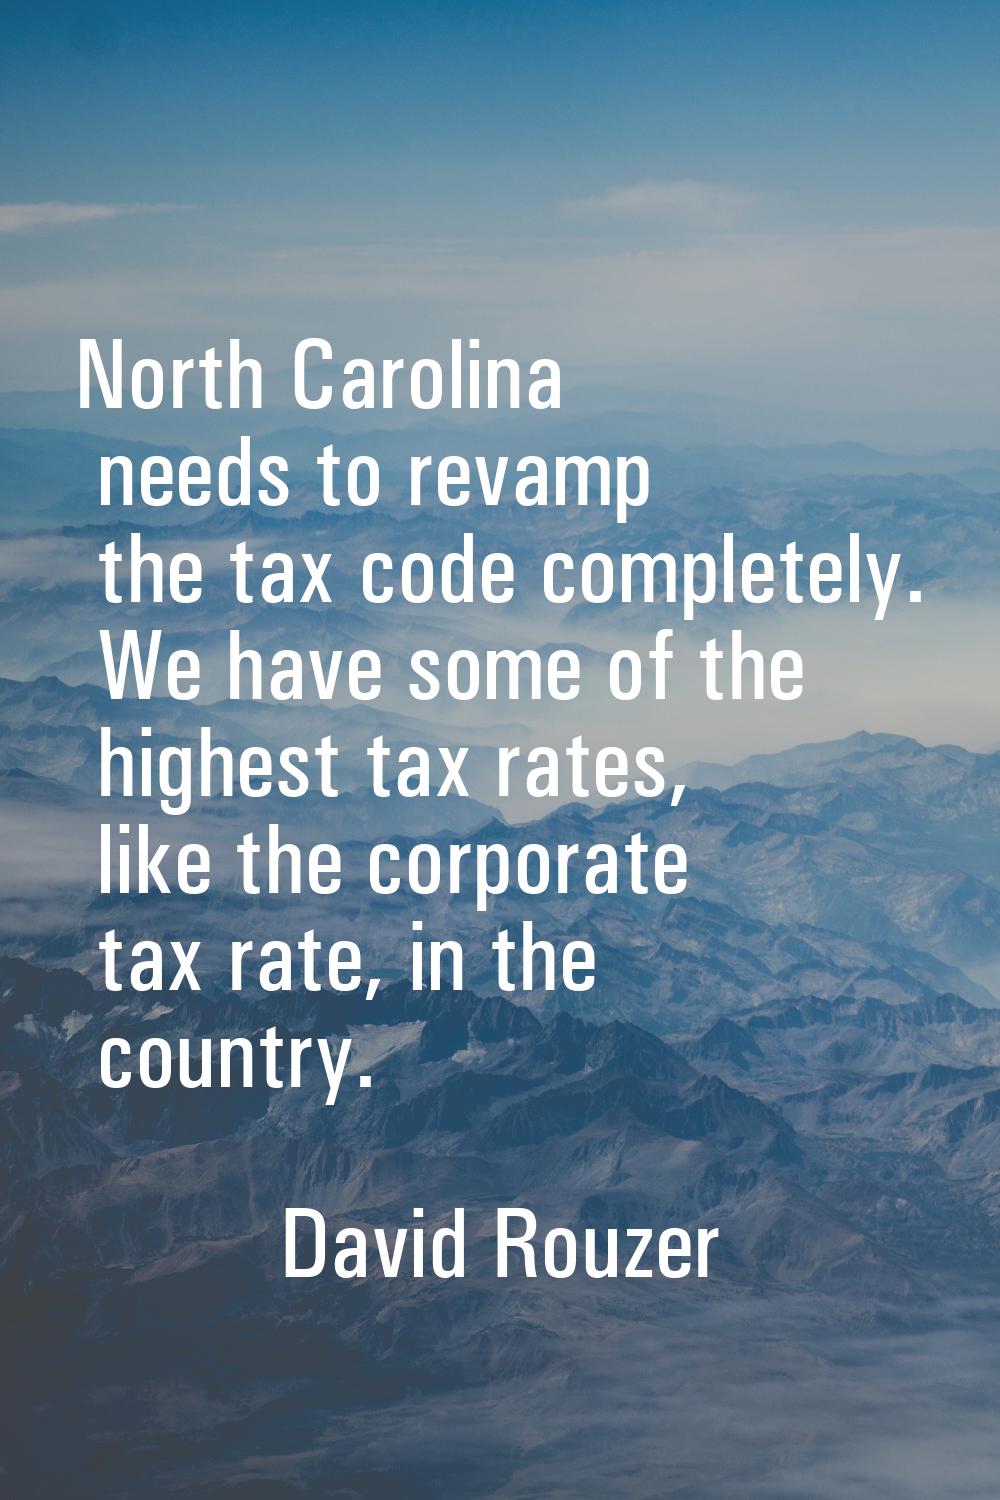 North Carolina needs to revamp the tax code completely. We have some of the highest tax rates, like